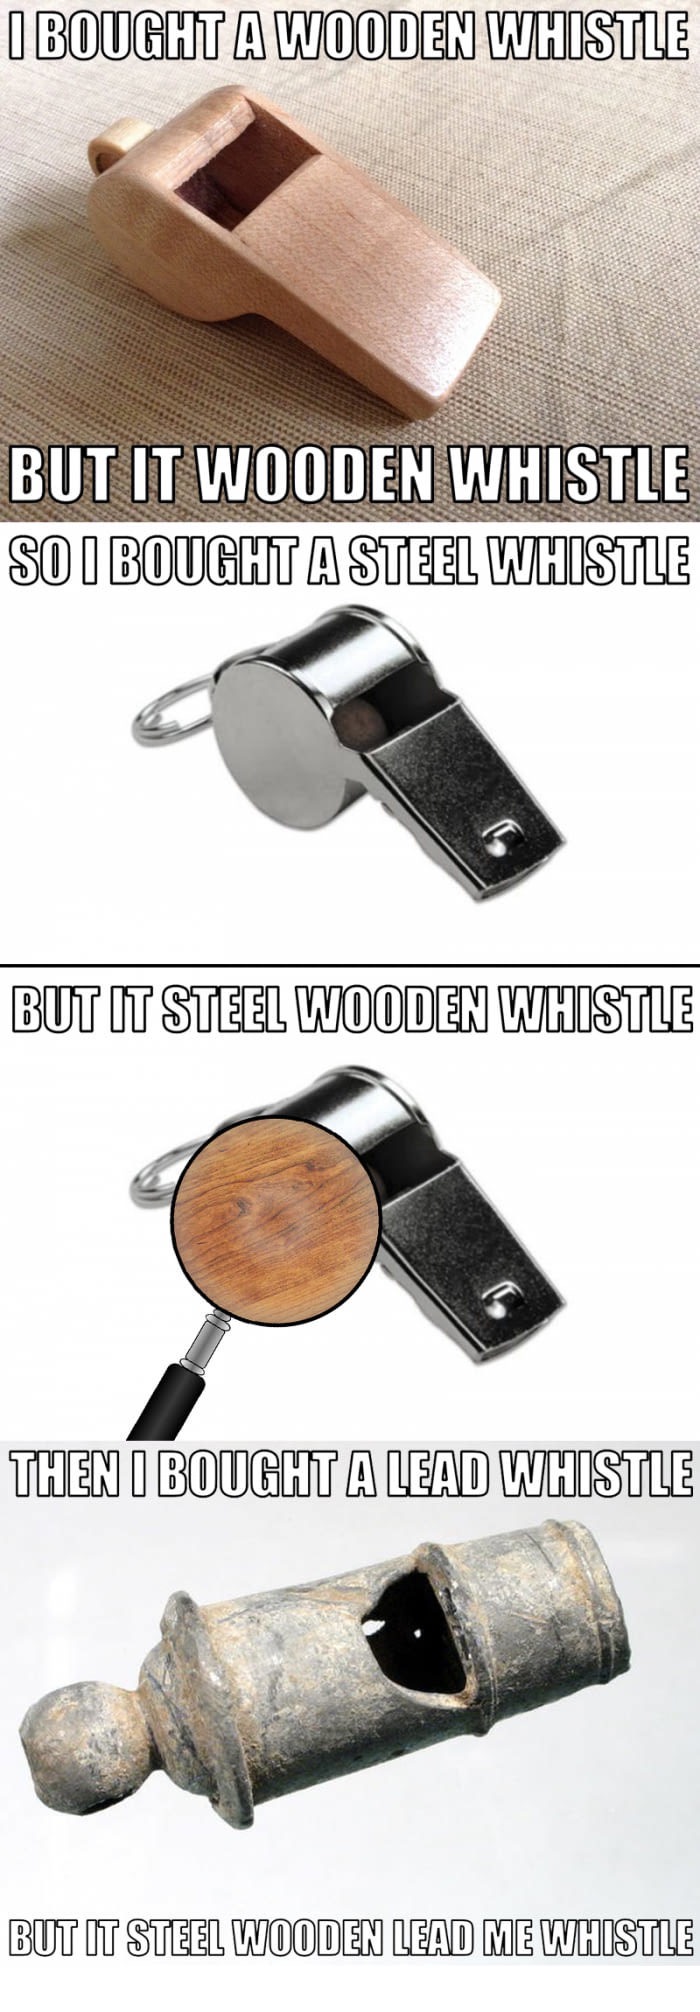 meme - whistle puns - I Bought A Wooden Whistle But It Wooden Whistle So I Bought A Steel Whistle But It Steel Wooden Whistle Then I Bought A Lead Whistle But It Steel Wooden Lead Me Whistle